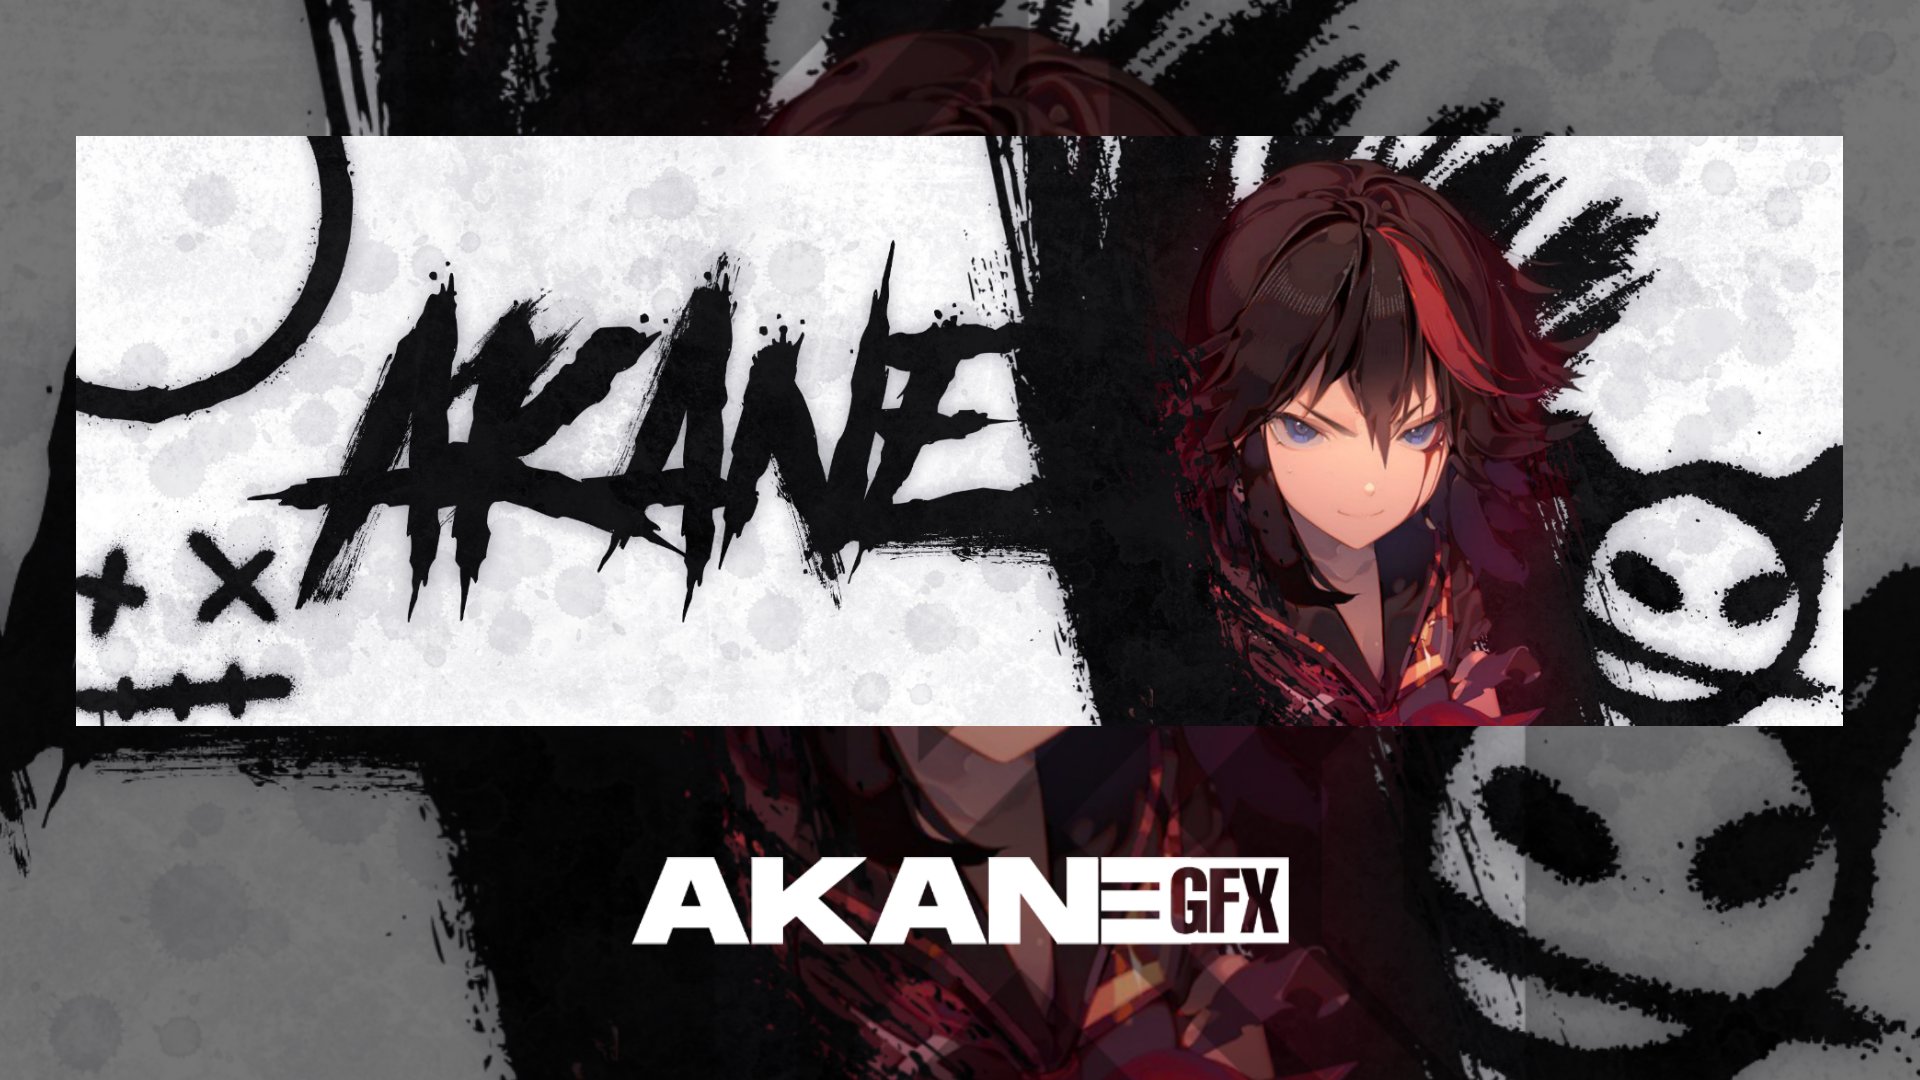 How To Make A FREE Anime HeaderBanner on Android  No Photoshop  Twitter  Header  RG Tricks  YouTube